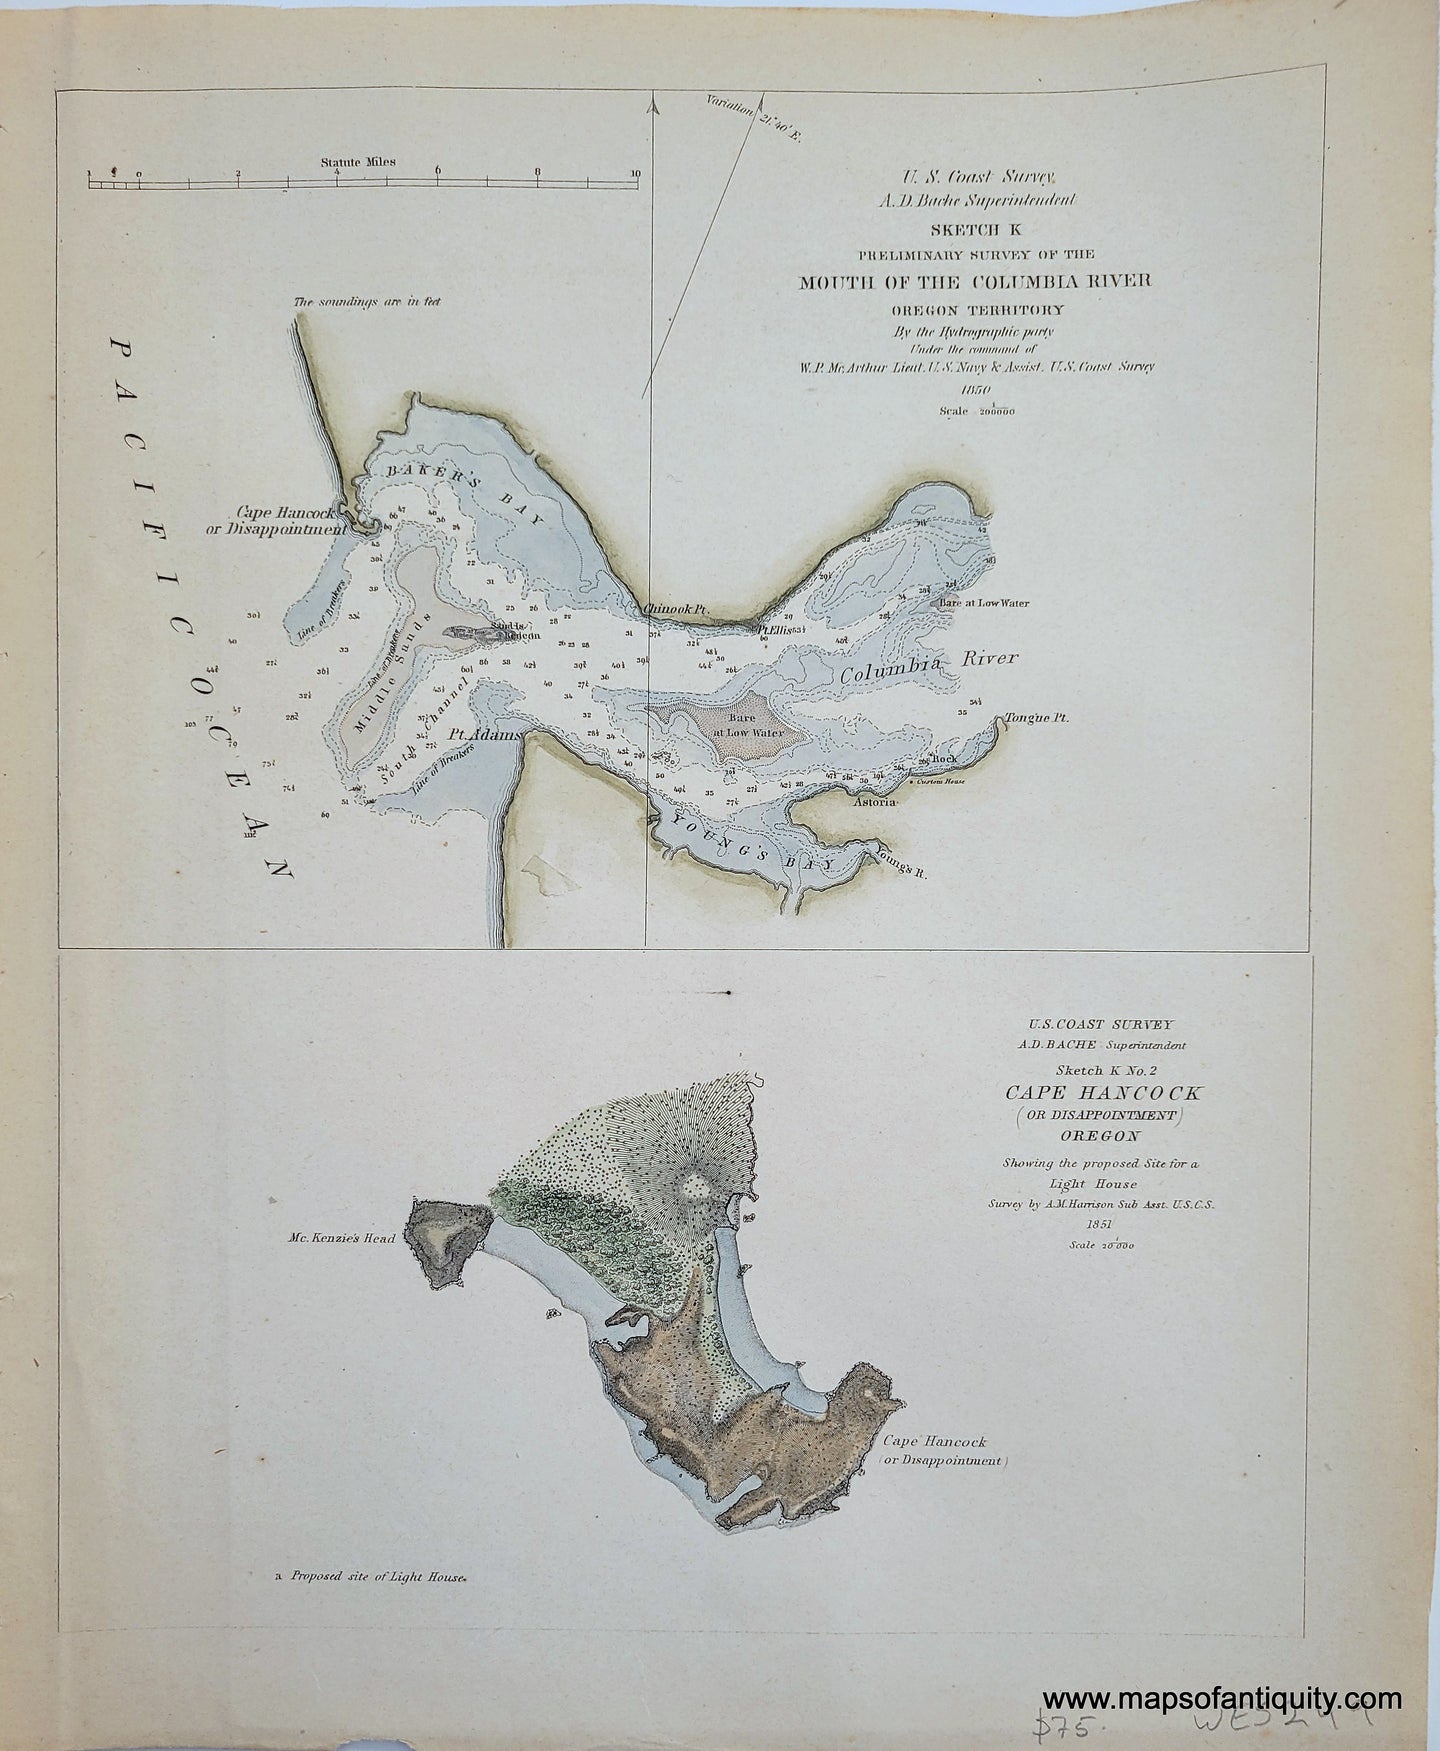 Antique-Hand-Colored-Coast-Chart-Sketch-K-Preliminary-Survey-of-the-Mouth-of-the-Columbia-River-Oregon-Territory-Sketch-K-No.-2-Cape-Hancock-(or-Disappointment)-Oregon-********-United-States-West-1851-US-Coast-Survey-Maps-Of-Antiquity